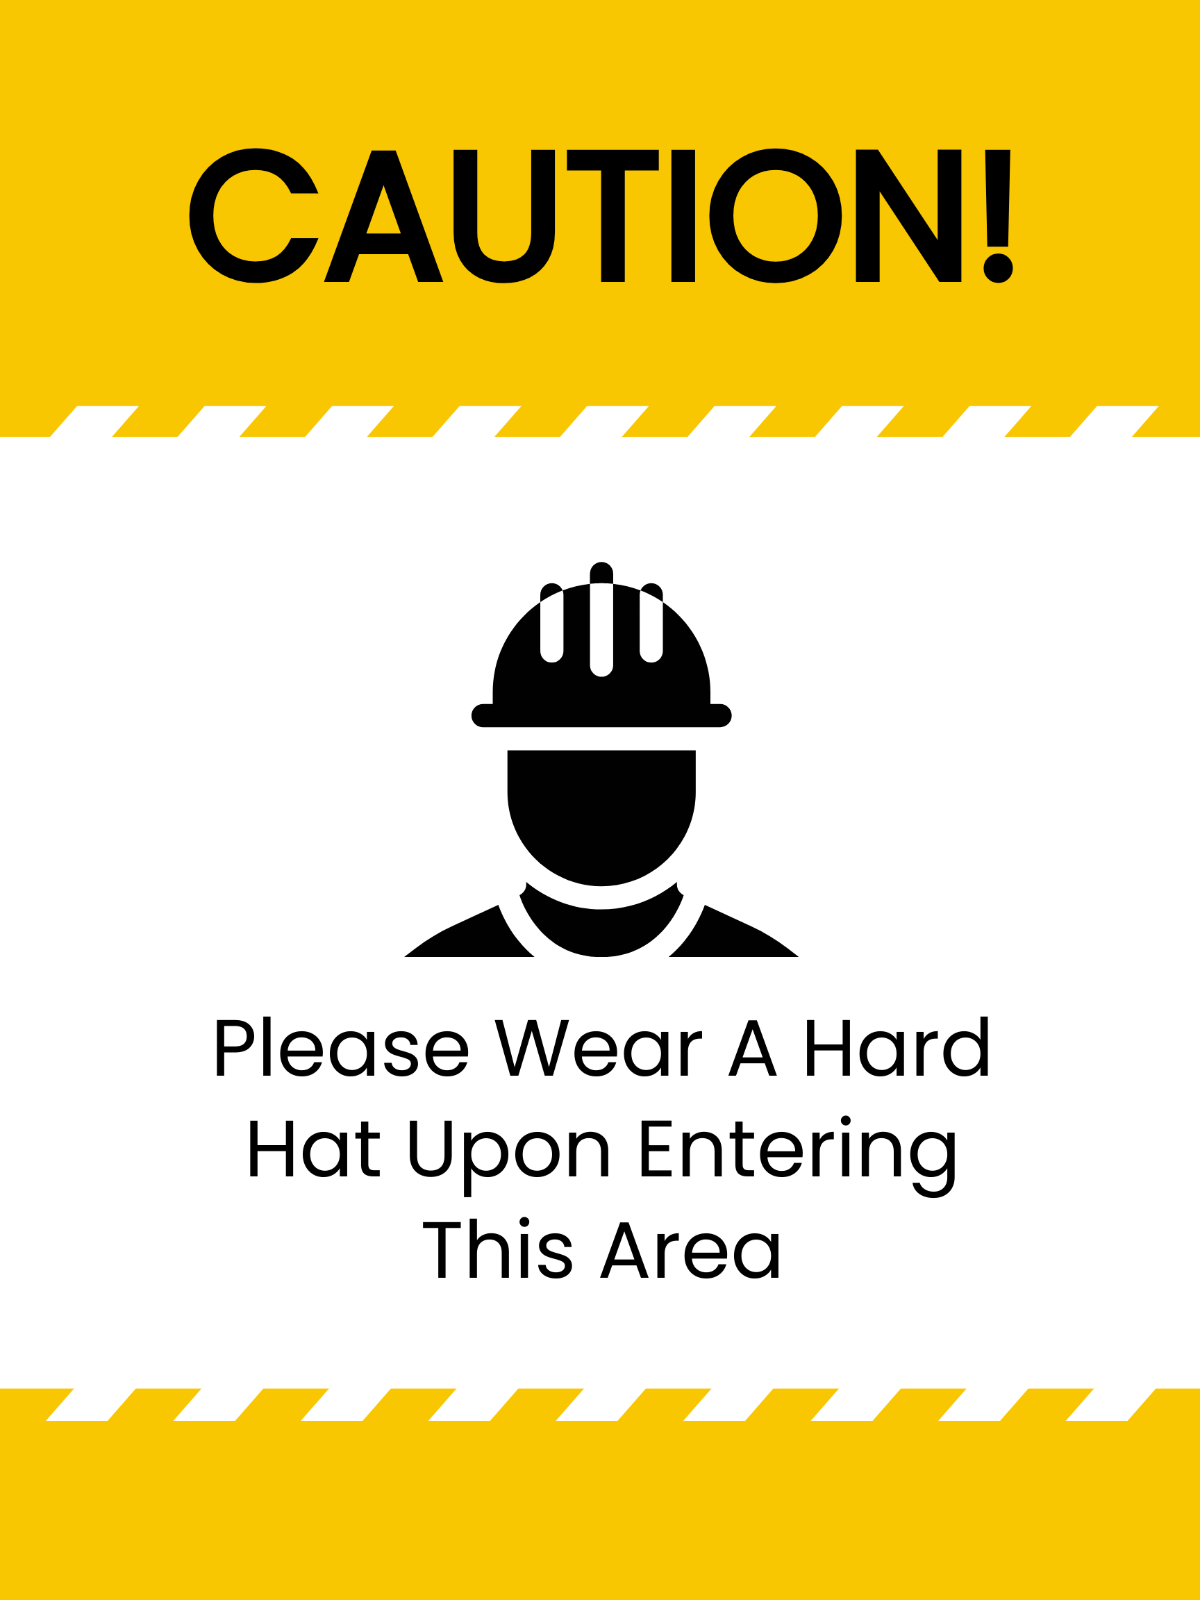 Caution - Hard Hats Required In This Area Sign Template